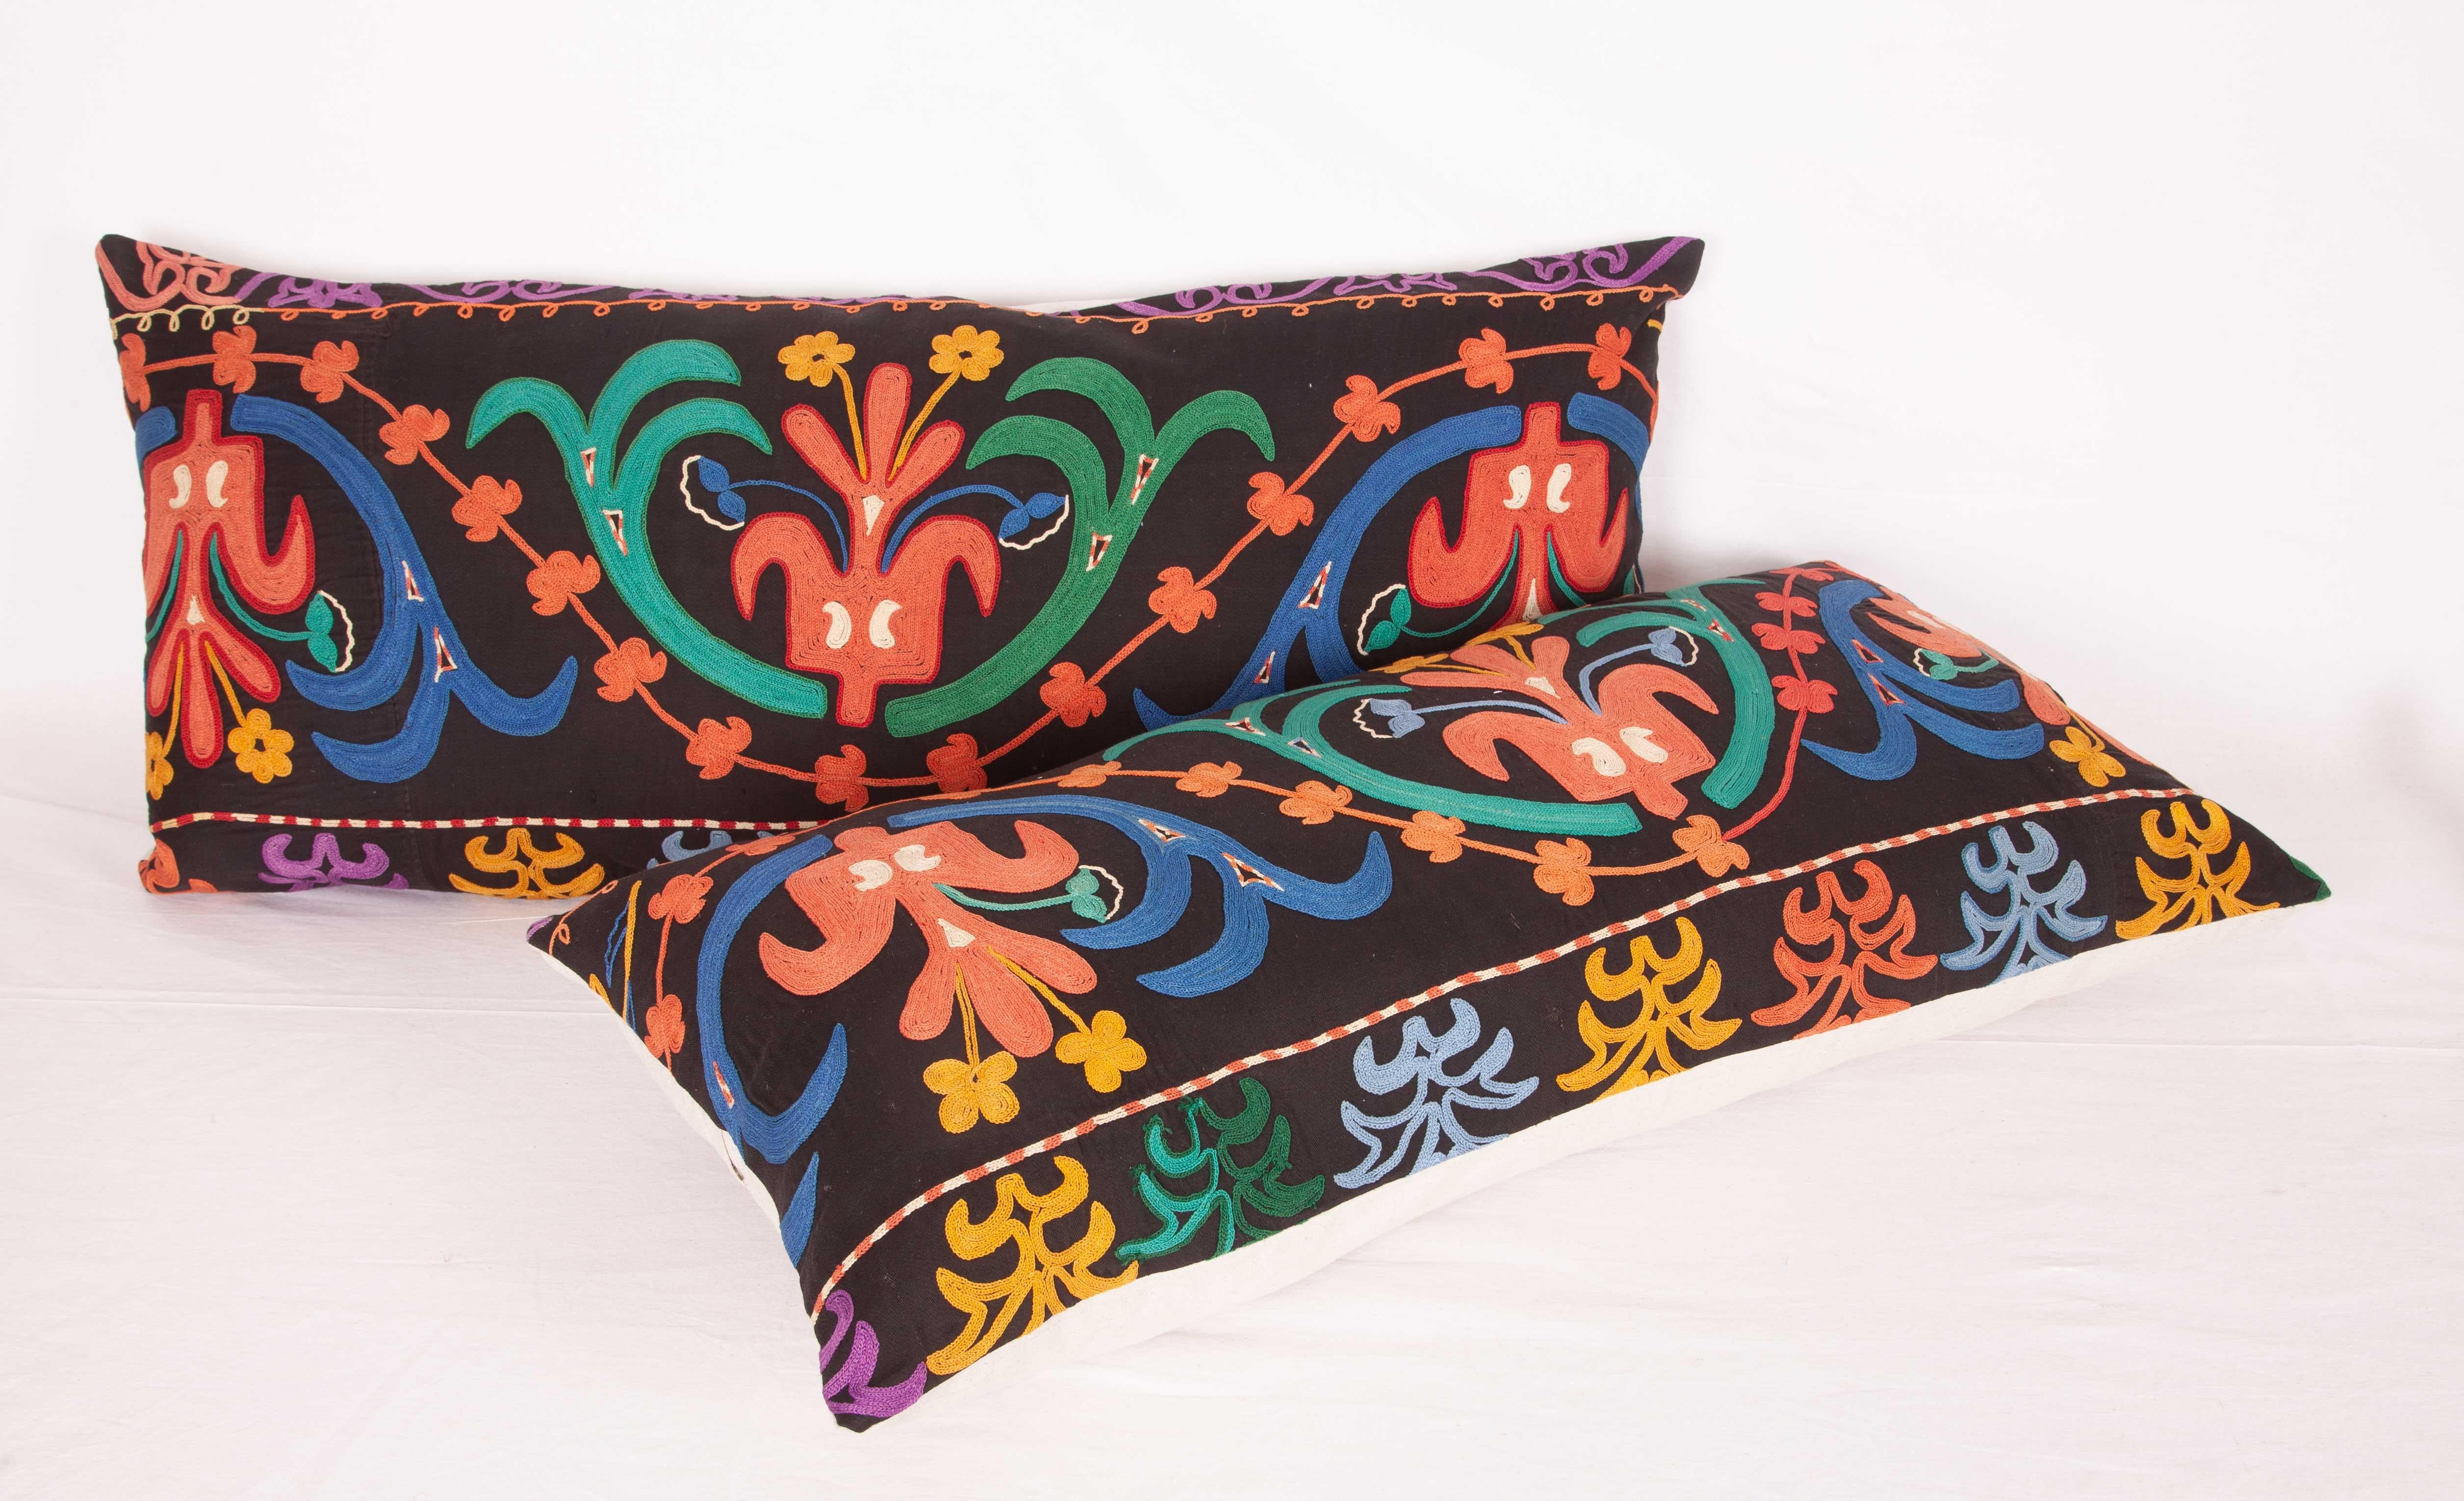 Kyrgyzstani Kyrgyz Lumbar Pillow Cases Made from a Mid-20th Century Kyrgyz Embroidery